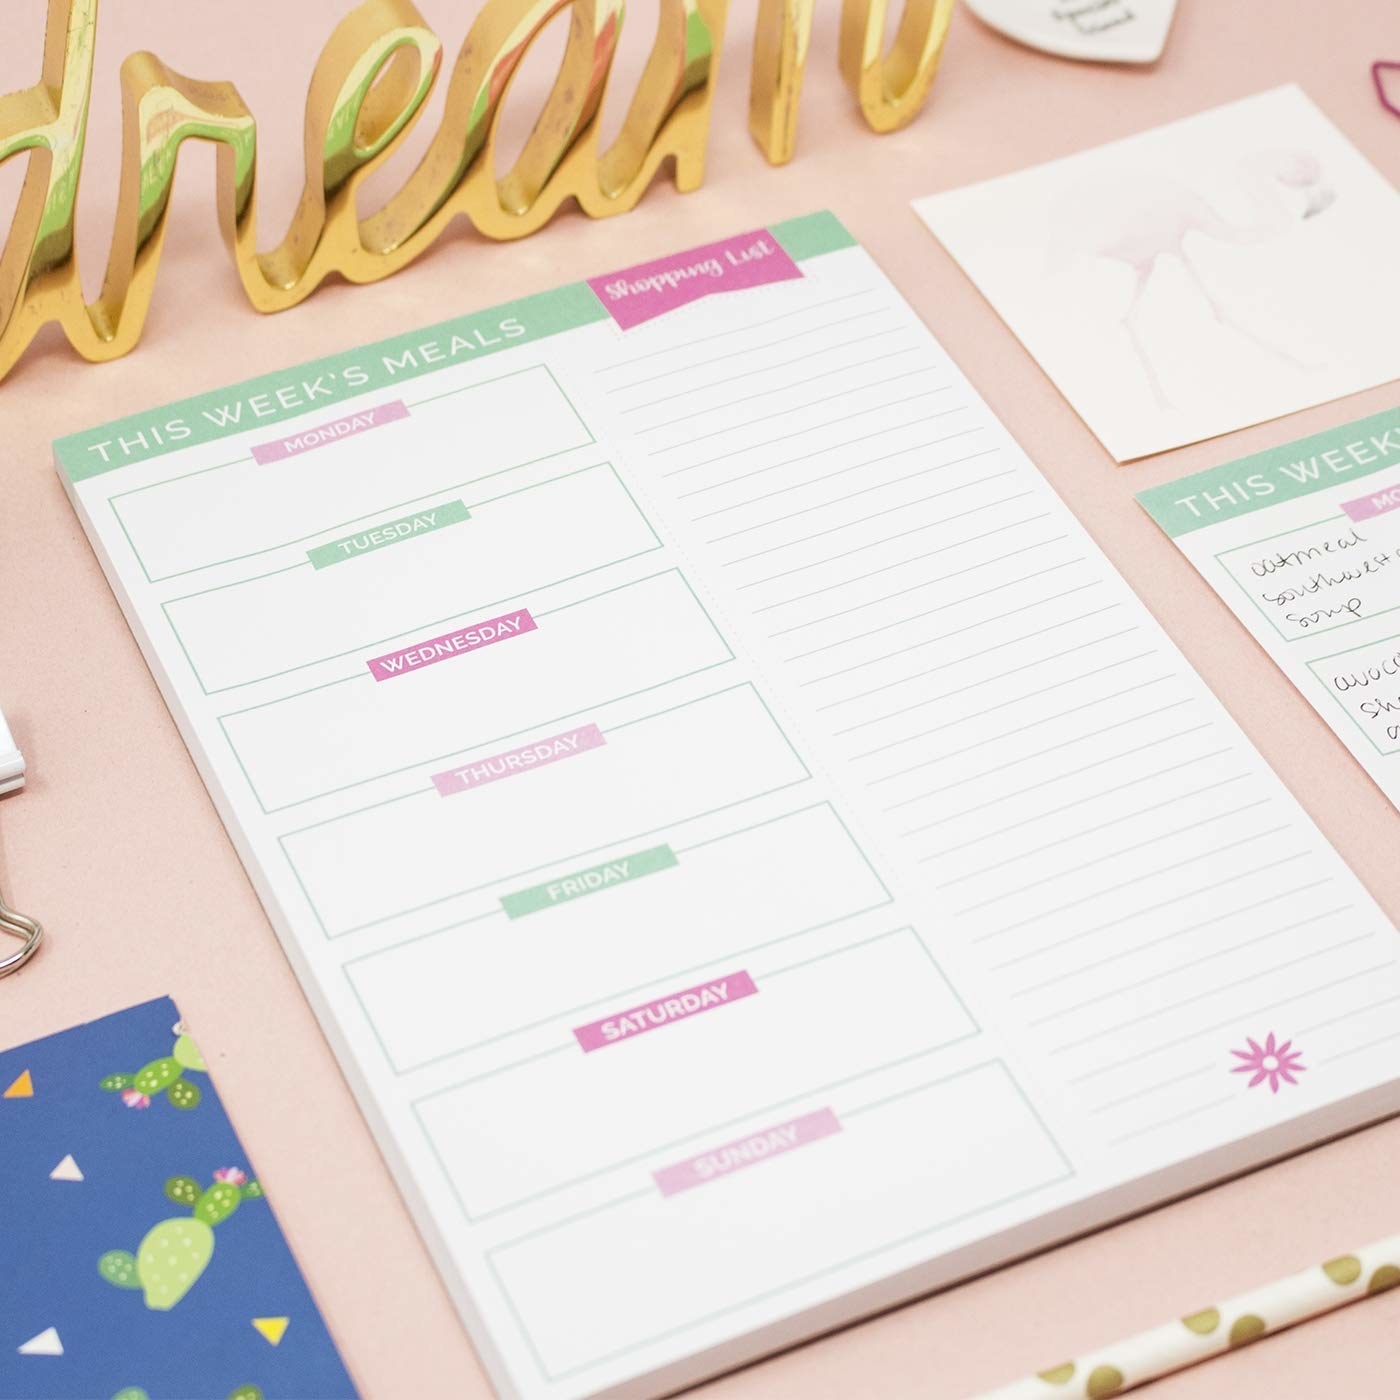 The meal prep planner on a desk